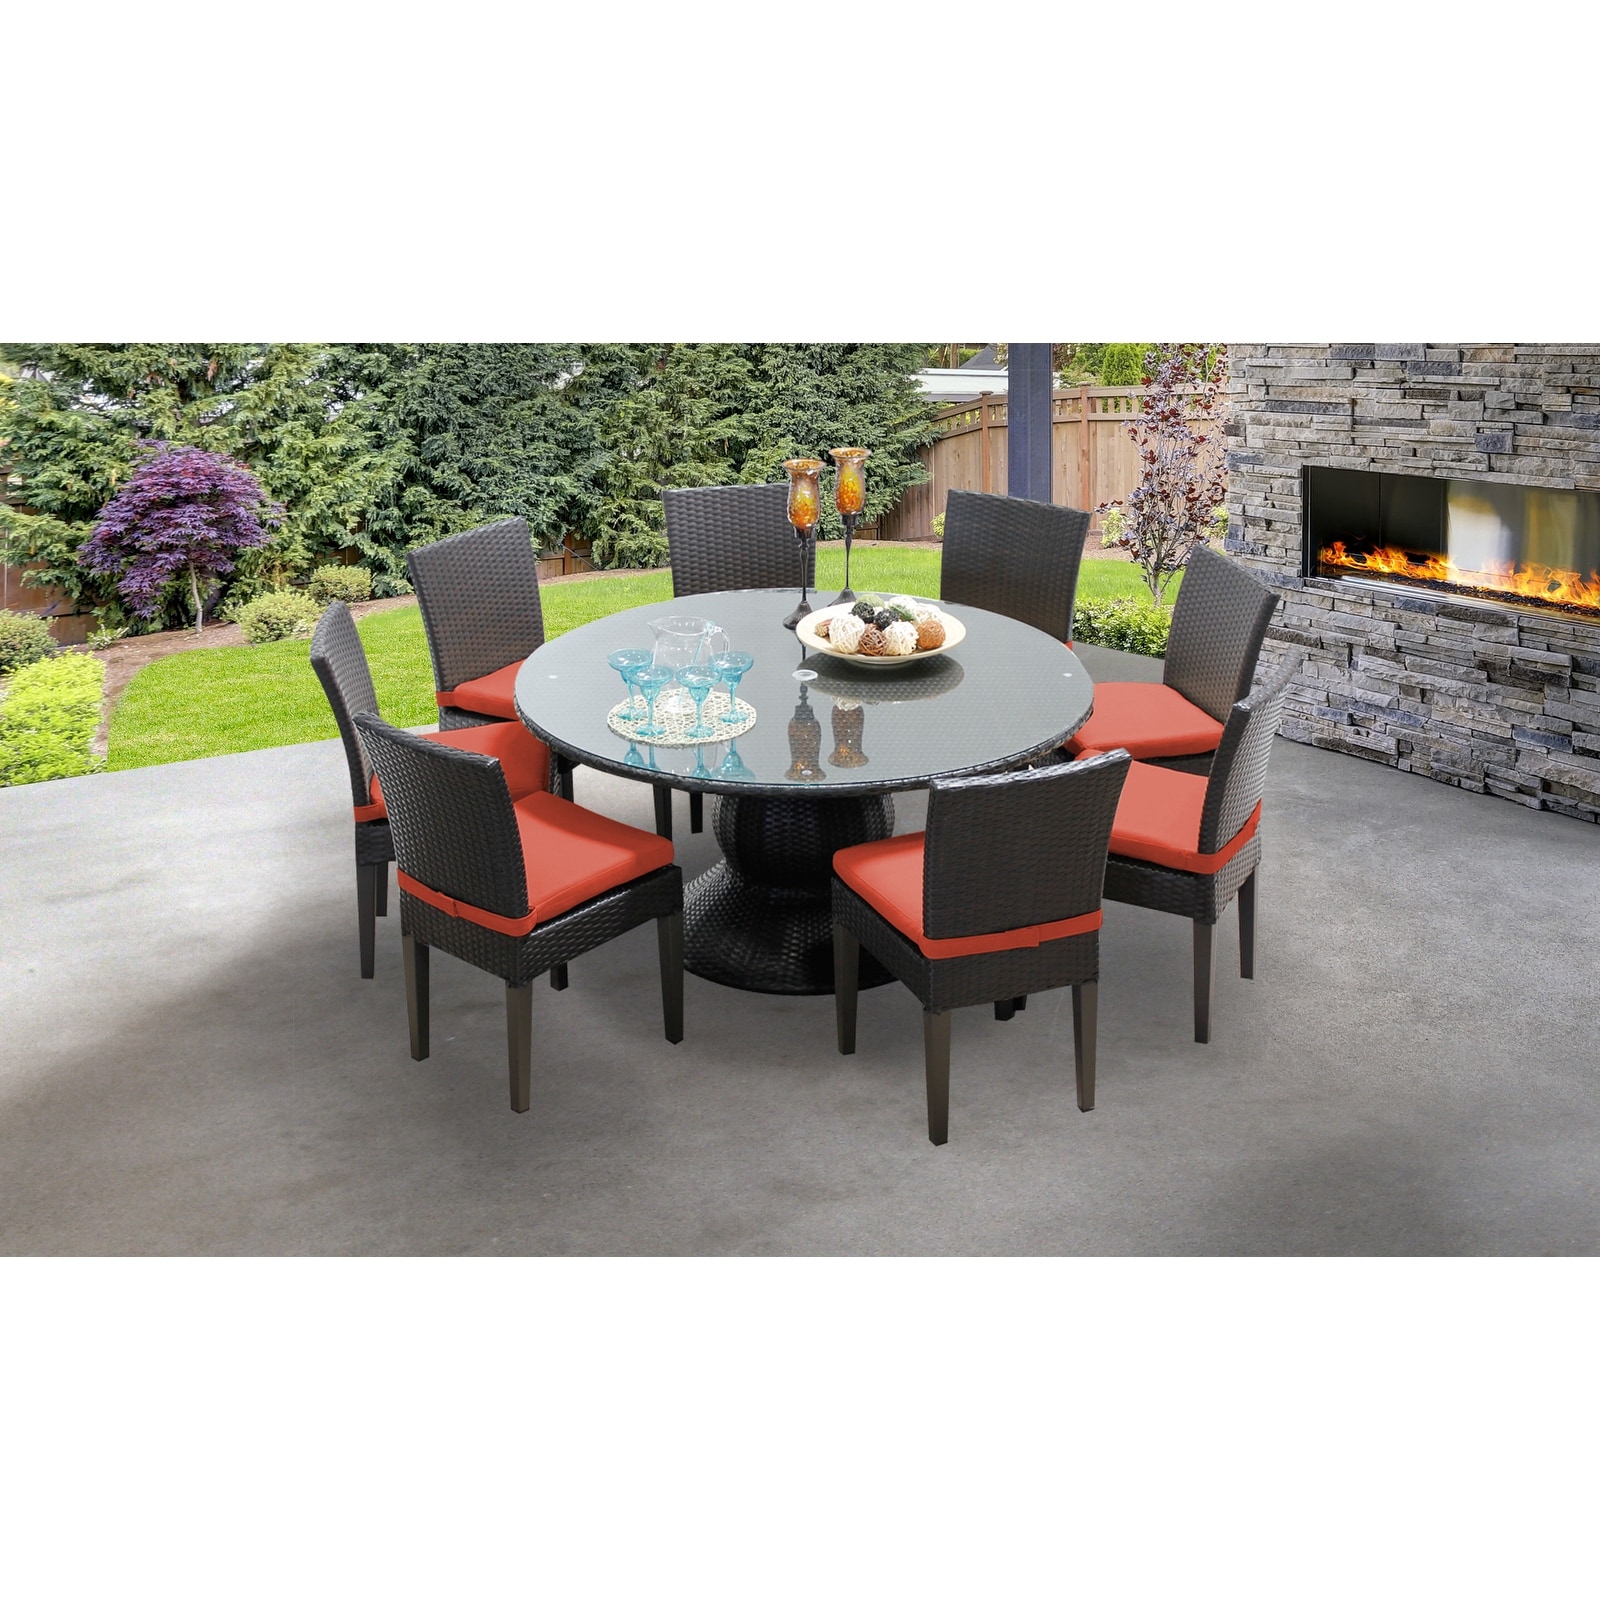 Barbados 60 Inch Outdoor Patio Dining Table With 8 Armless Chairs